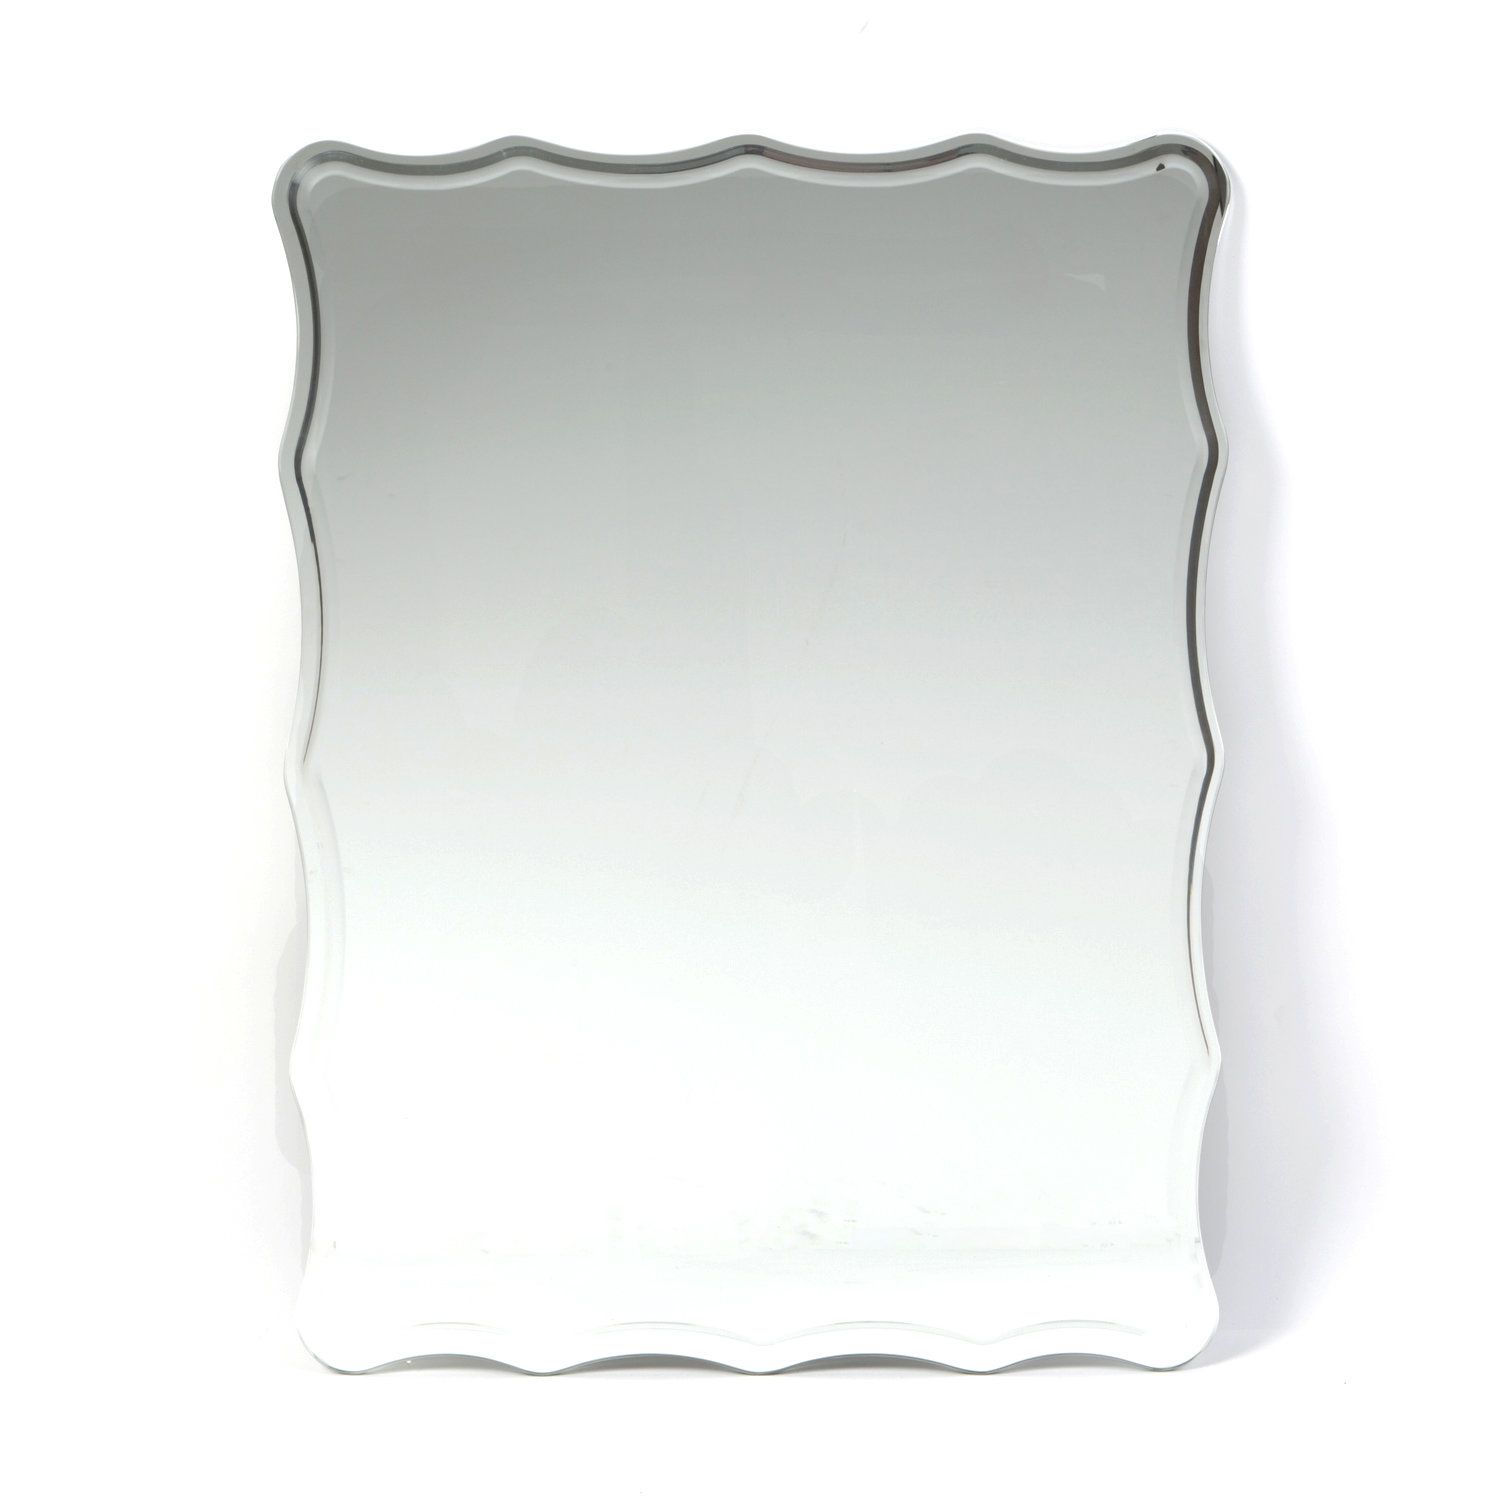 Farmhouse & Rustic Wade Logan Wall & Accent Mirrors | Birch Lane For Gaunts Earthcott Wall Mirrors (View 15 of 20)